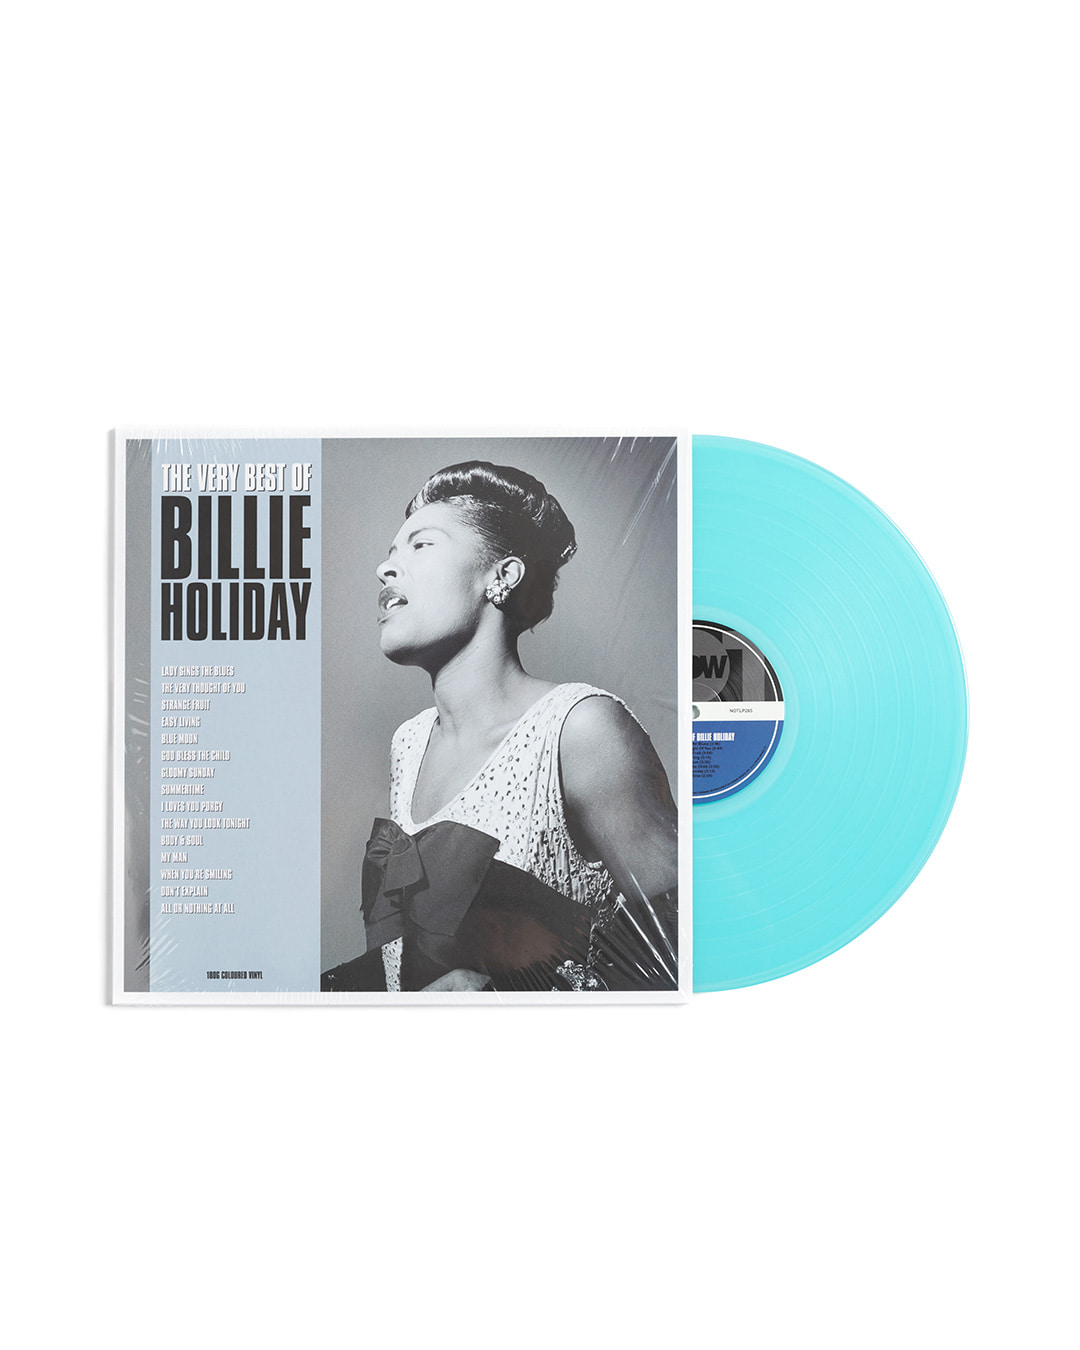 BILLIE HOLIDAY - THE VERY BEST OF BILLIE HOLIDAY (electric blue disc)